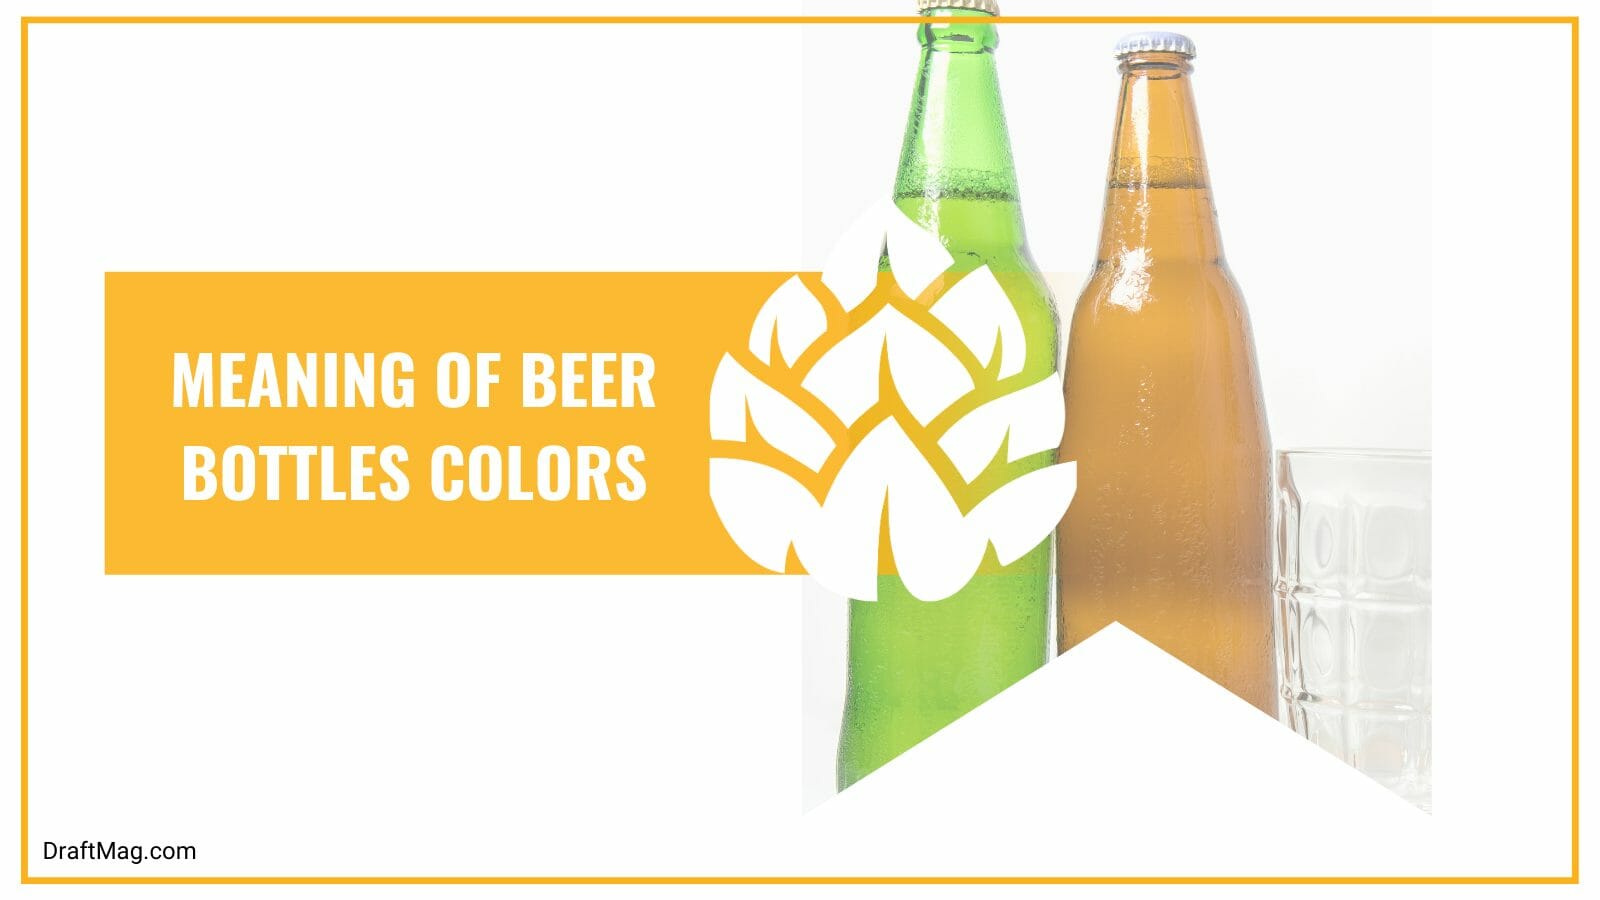 Meaning of beer bottle colors